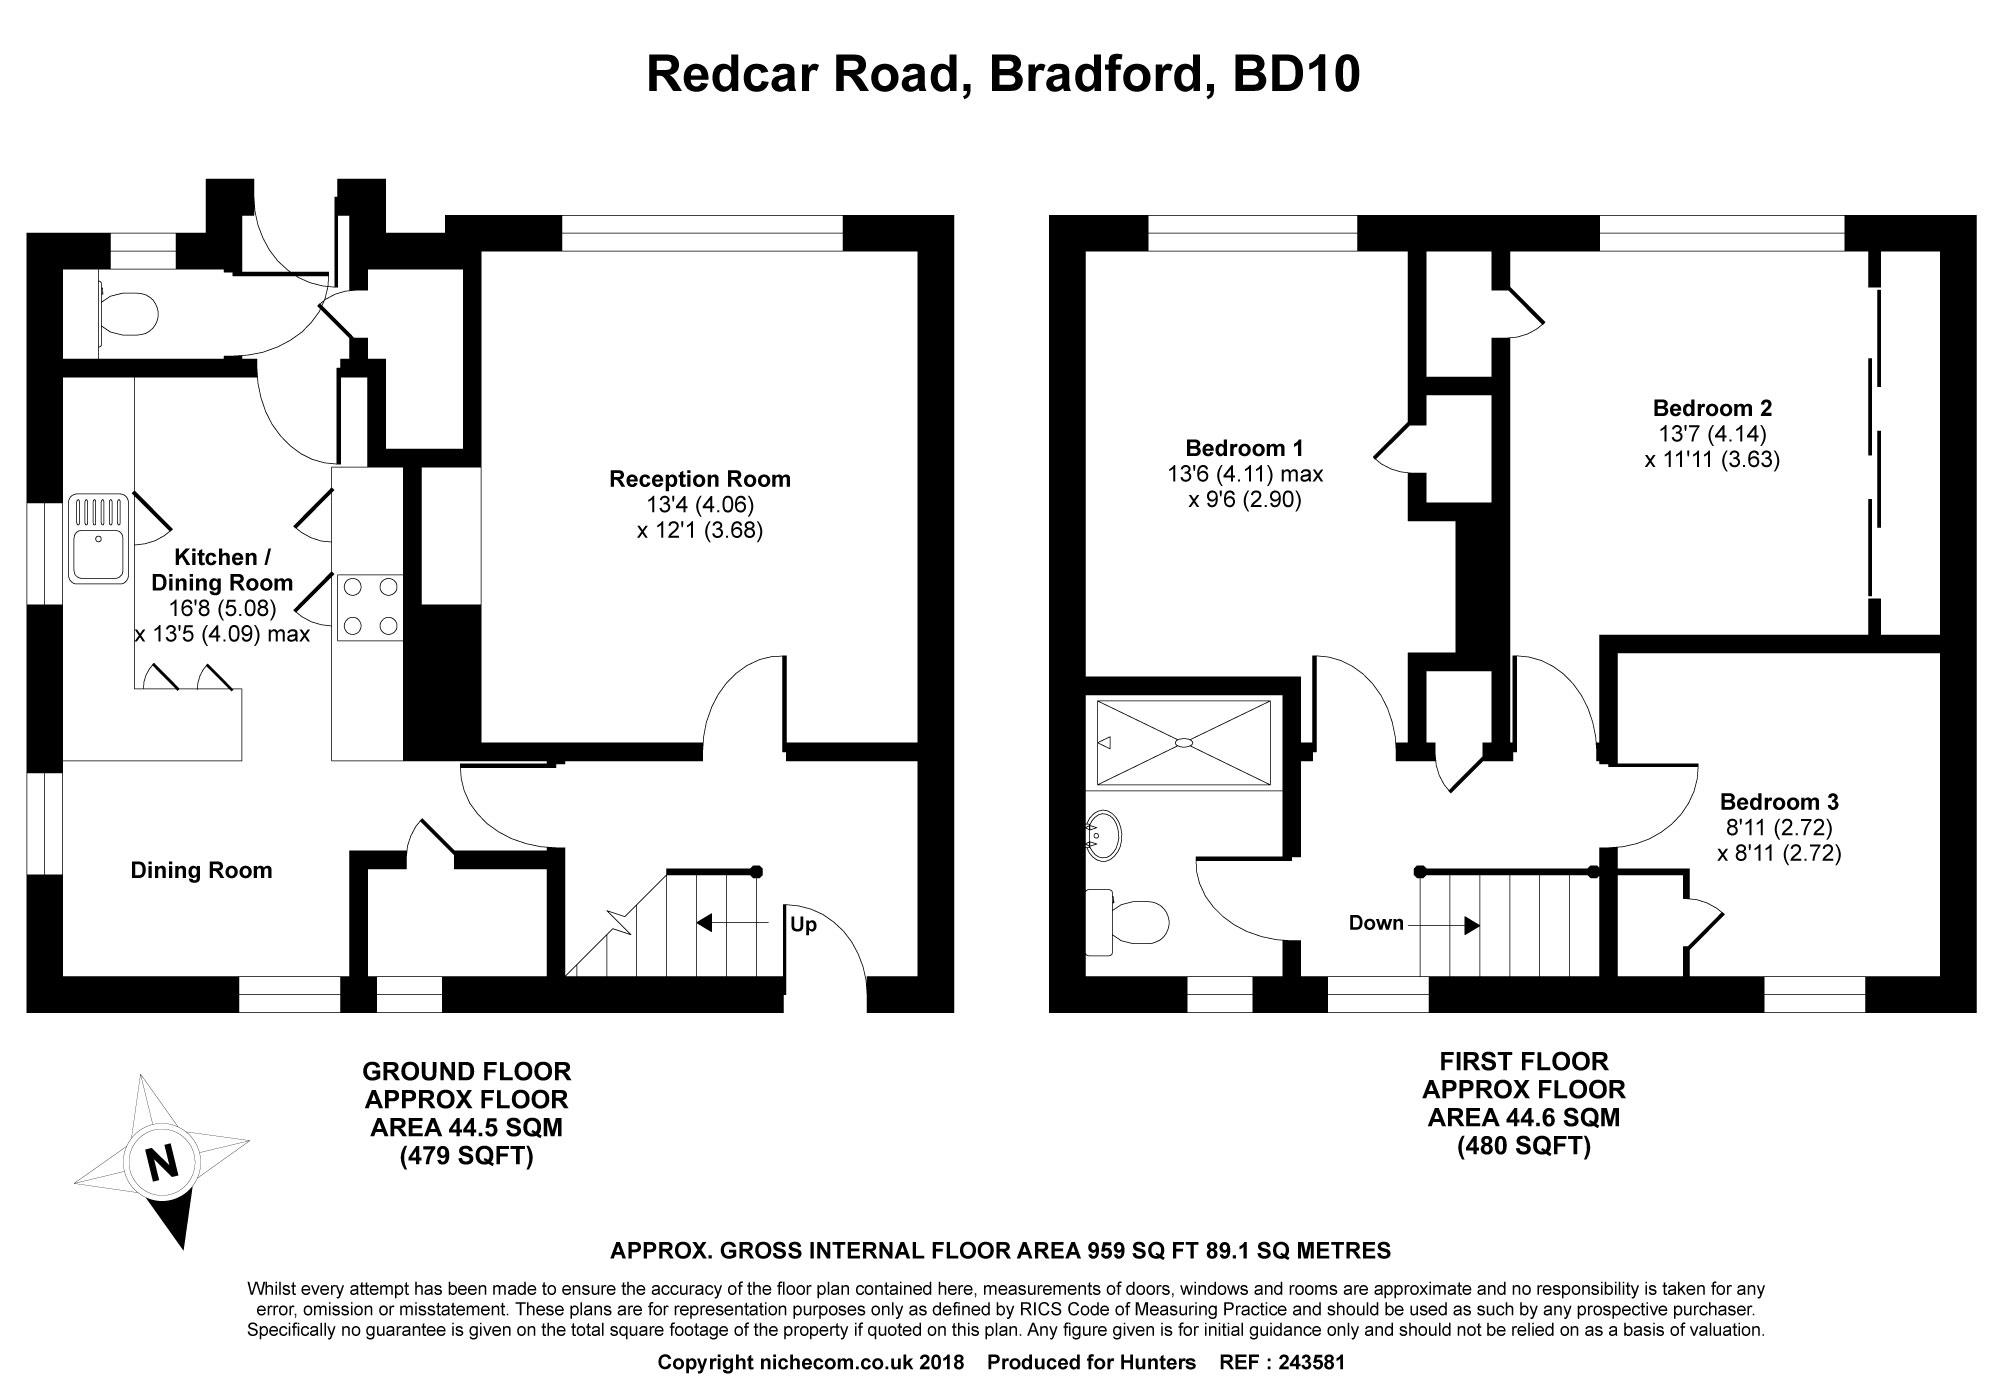 3 Bedrooms Semi-detached house for sale in Redcar Road, Bradford BD10